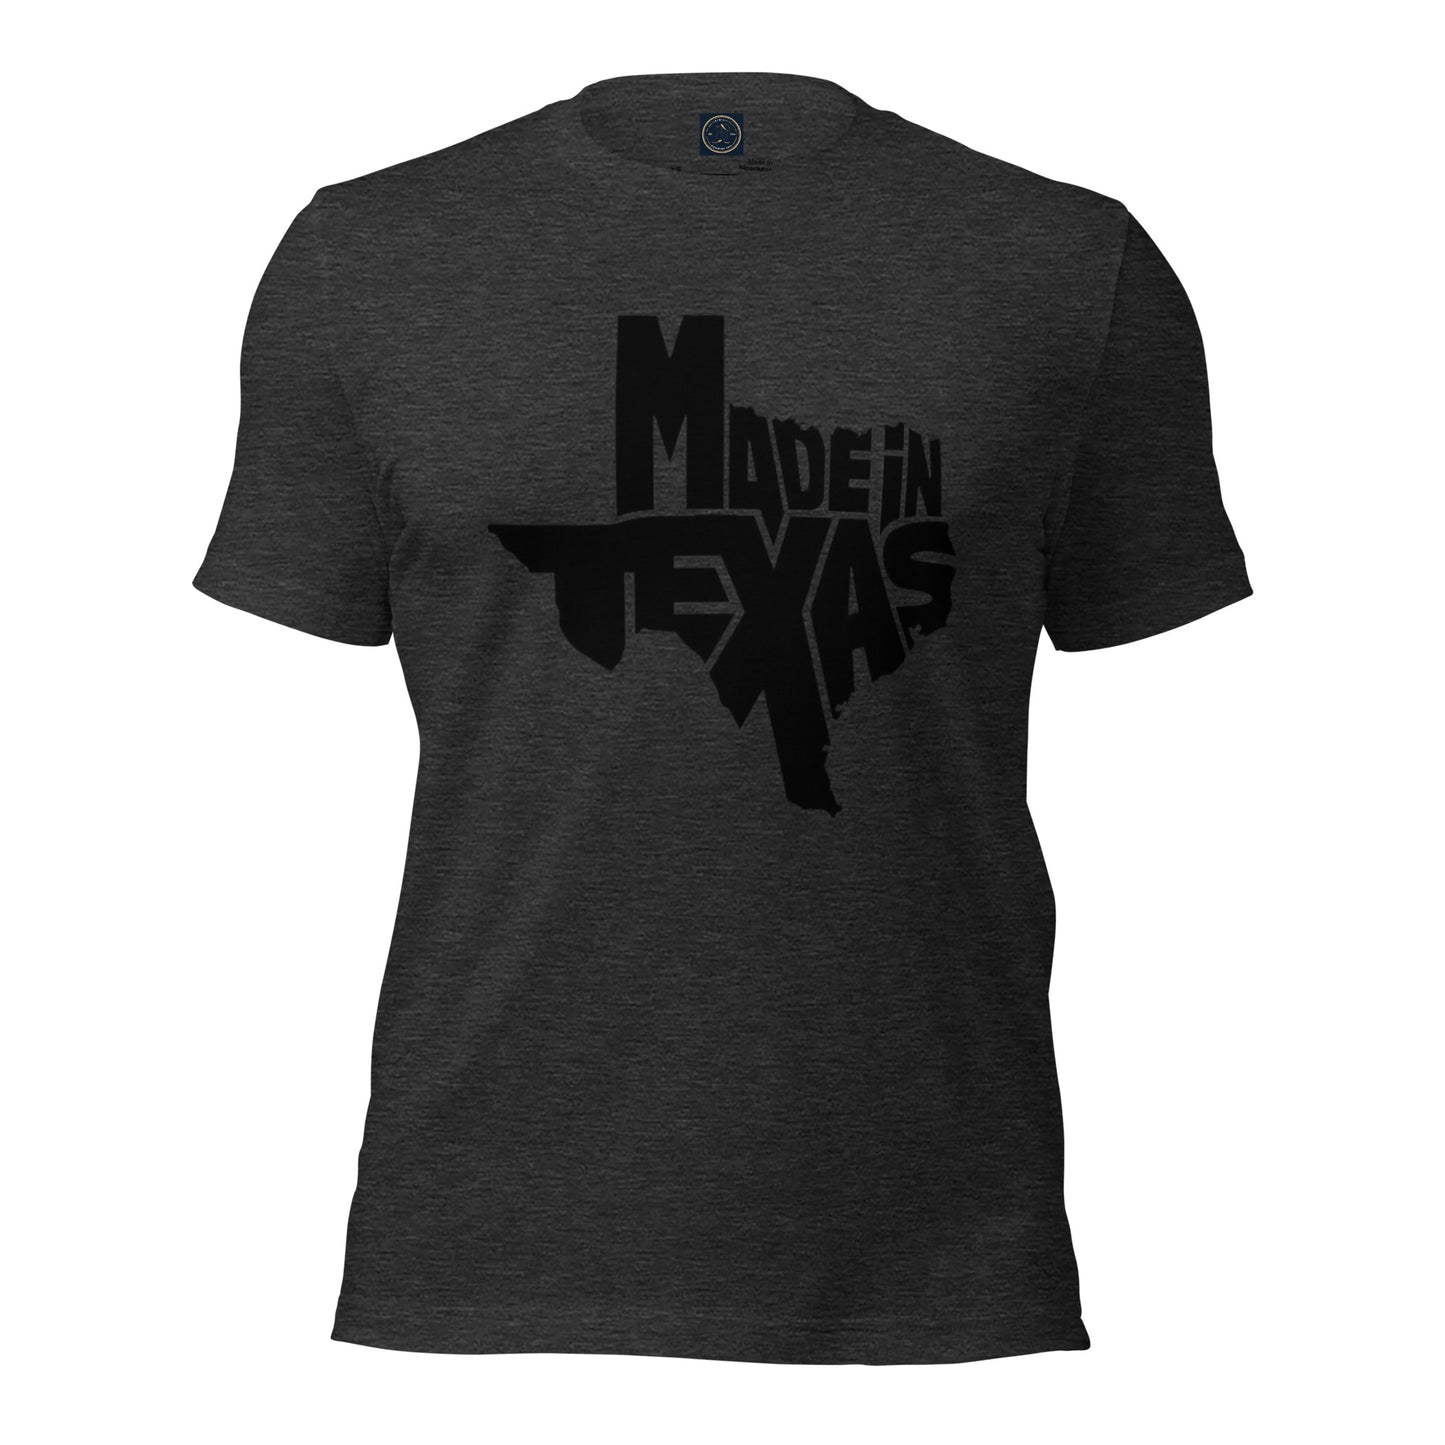 Made In Texas - Classic Country Tees